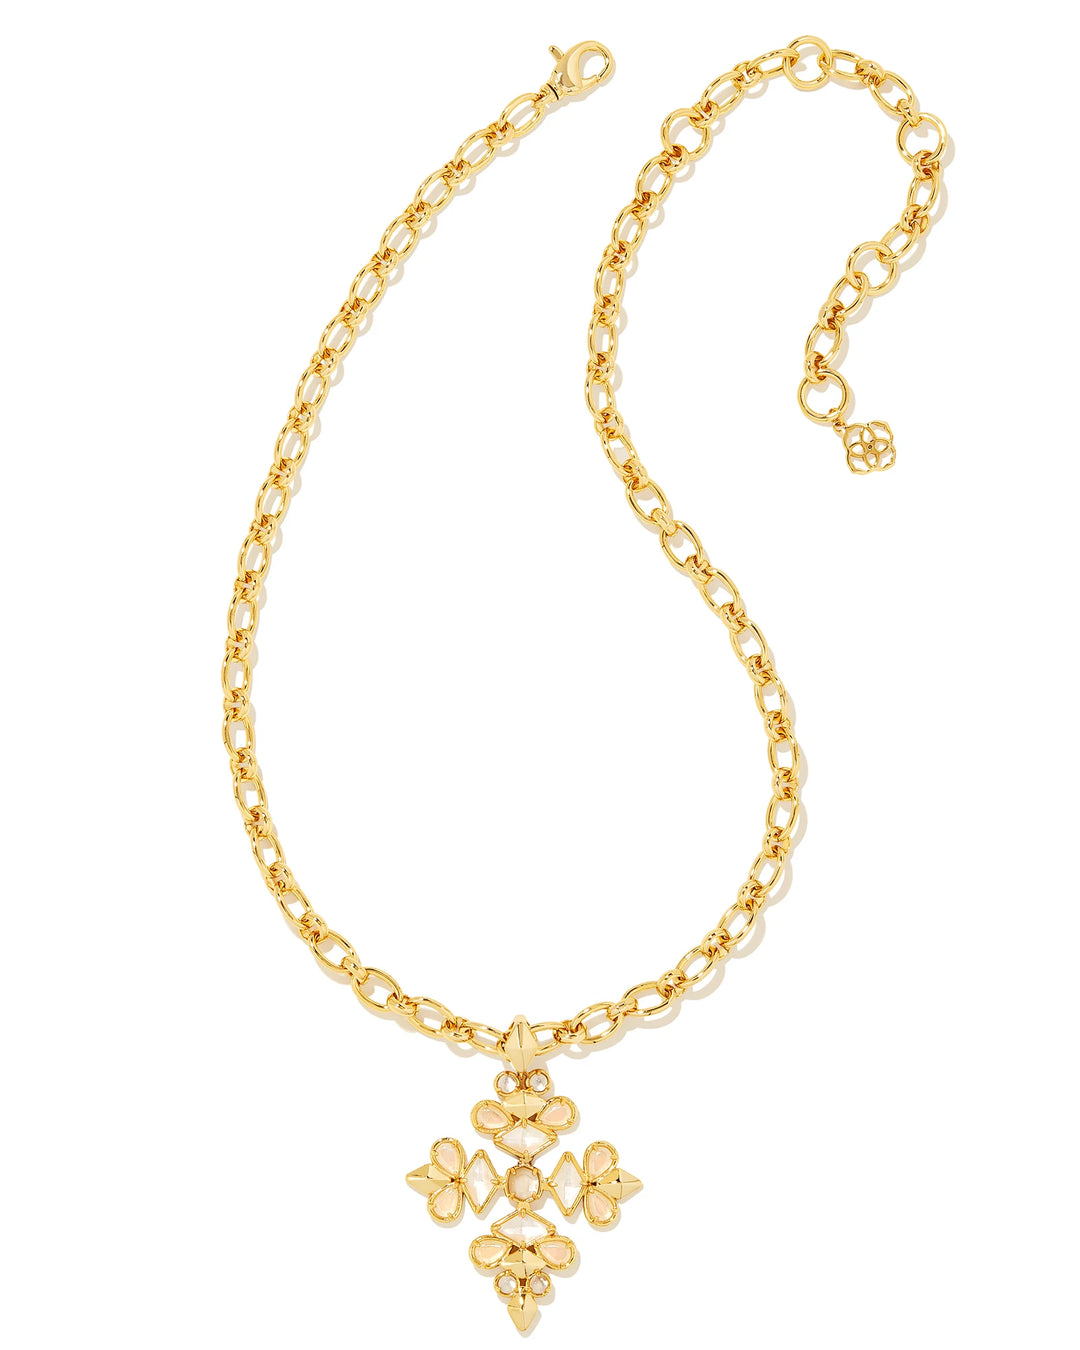 Kendra Scott Kinsley Gold Statement Necklace in Ivory Mix